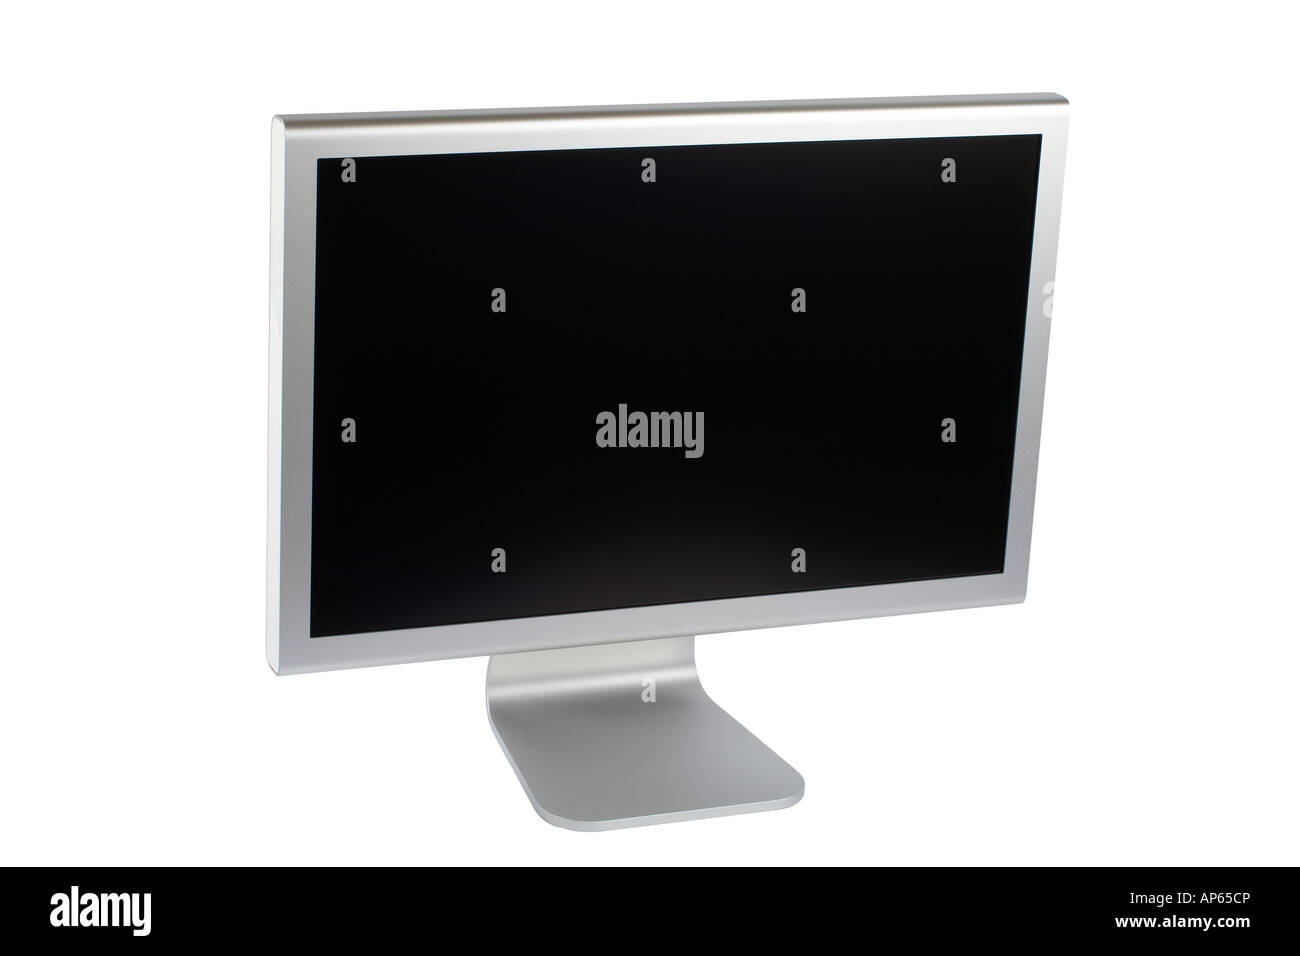 A flat panel lcd computer monitor isolated on white background Stock Photo